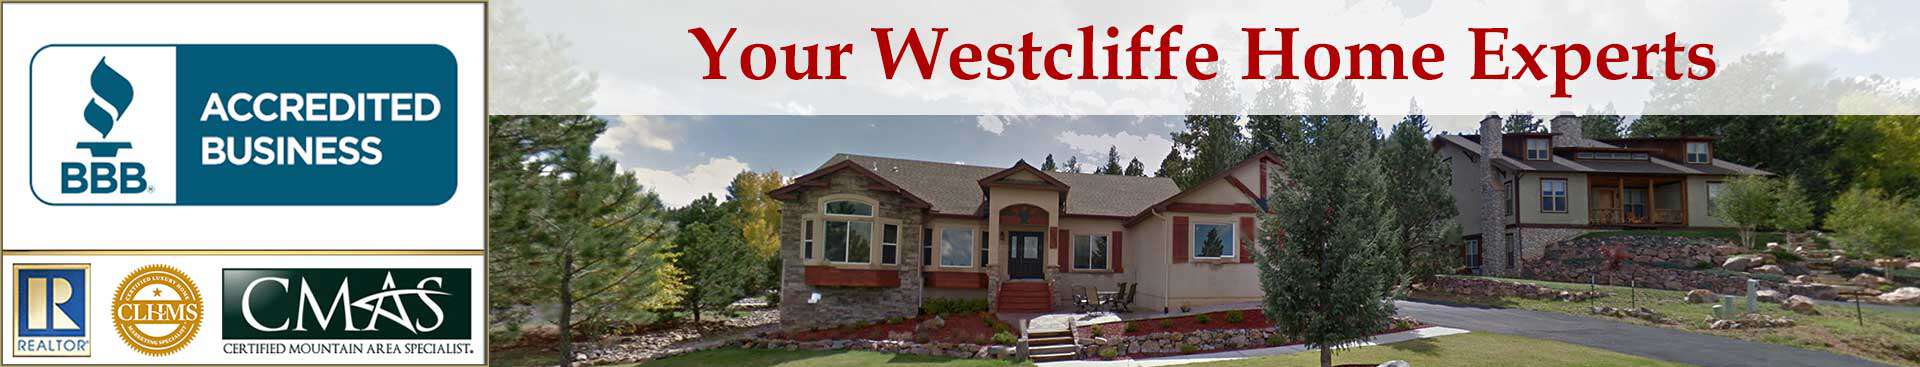 Westcliffe Accreditations Banner